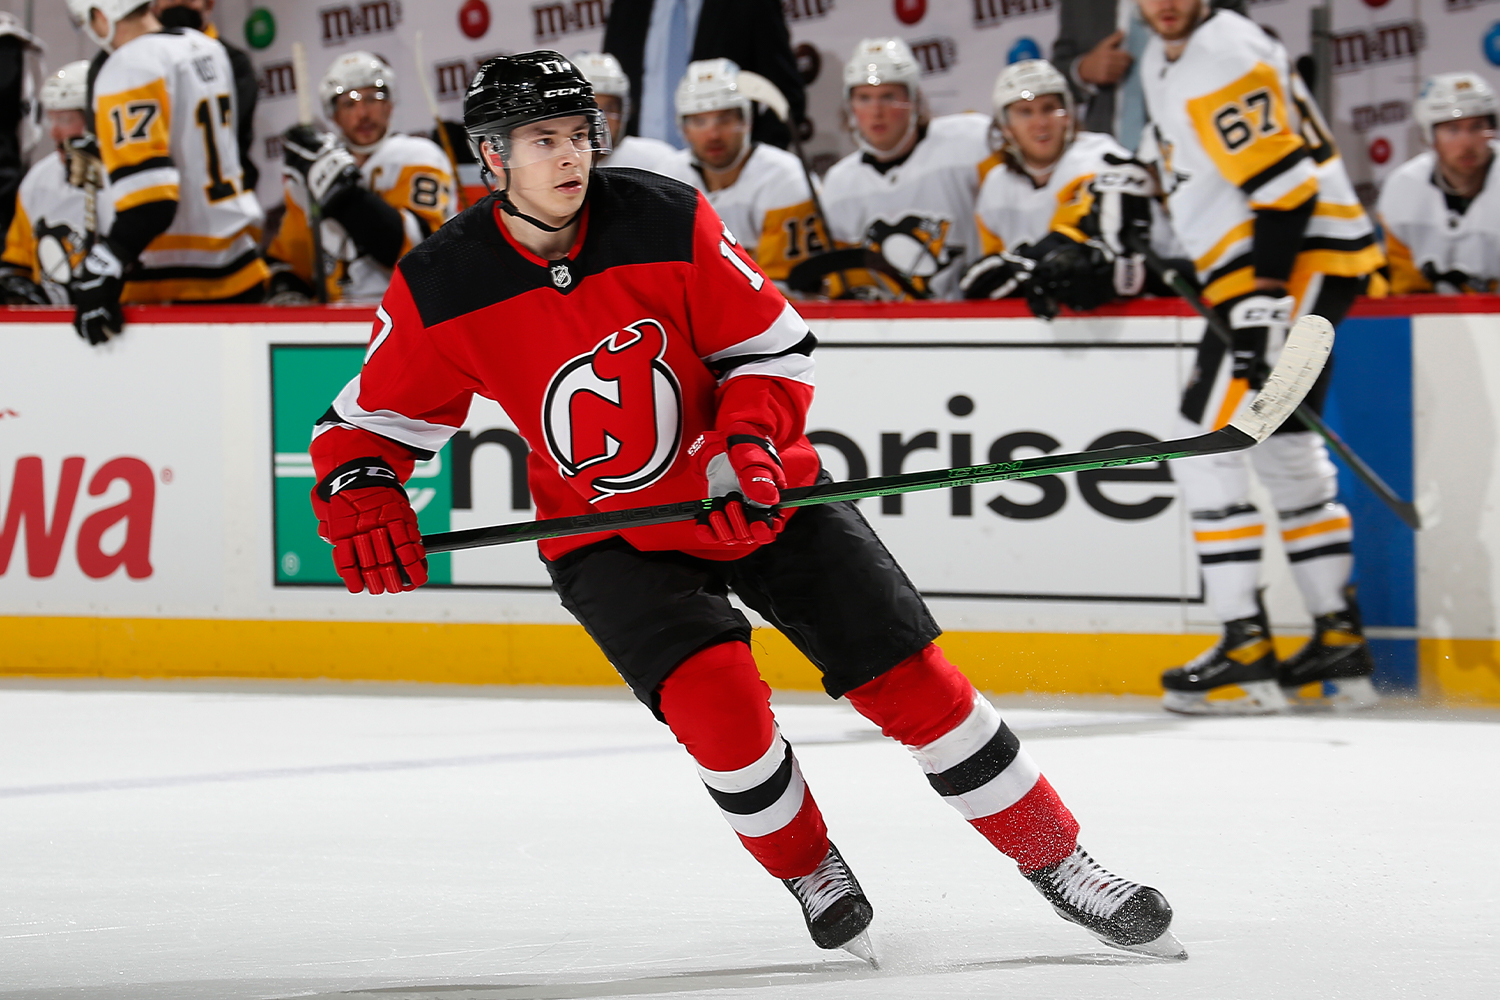 Yegor Sharangovich #17 of the New Jersey Devils skates against the Pittsburgh Penguins during the game at Prudential Center on April 9, 2021